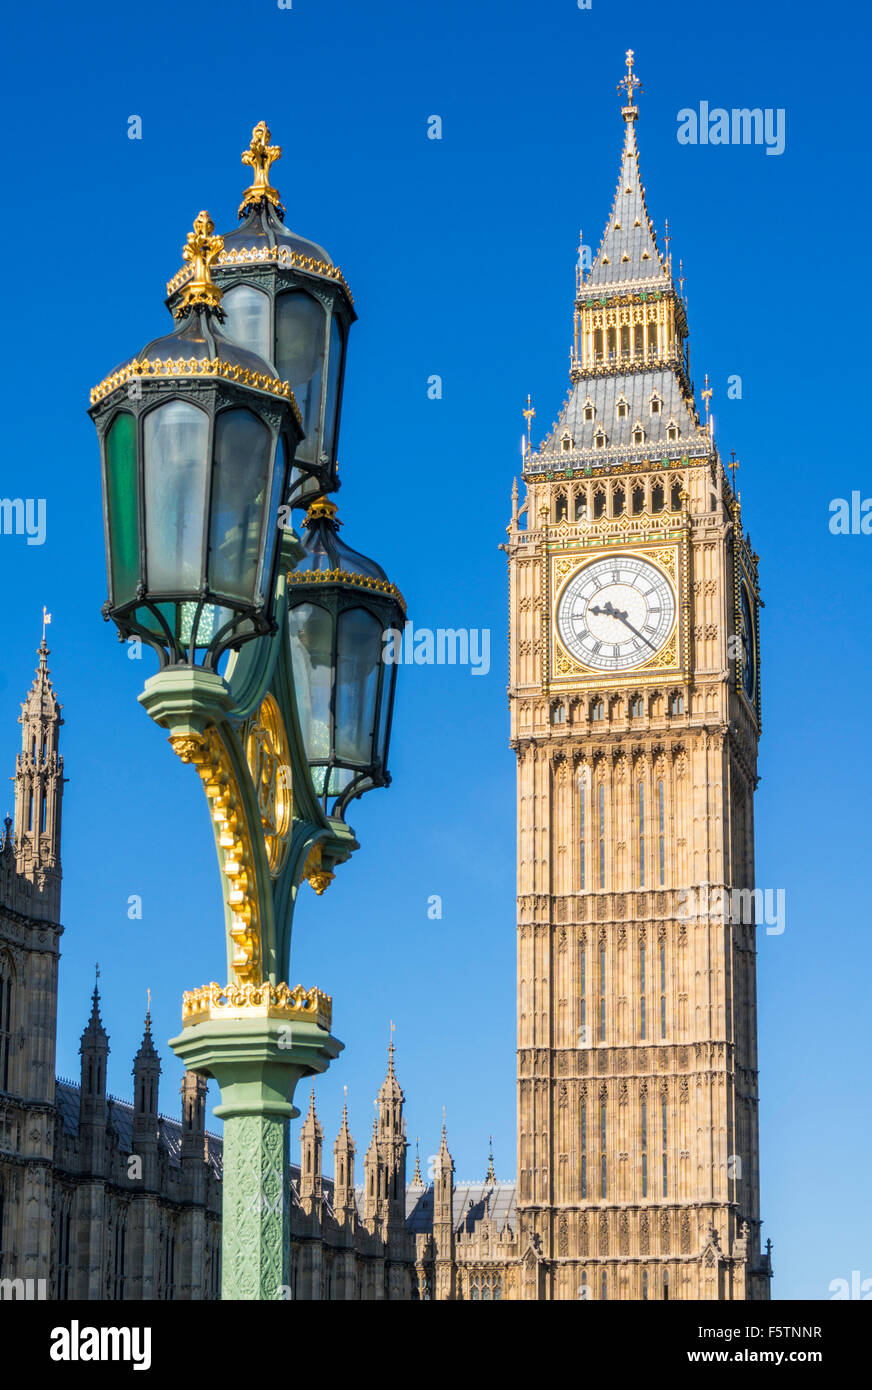 Big Ben clock tower above the Palace of Westminster and houses of Parliament City of London England UK GB EU Europe Stock Photo